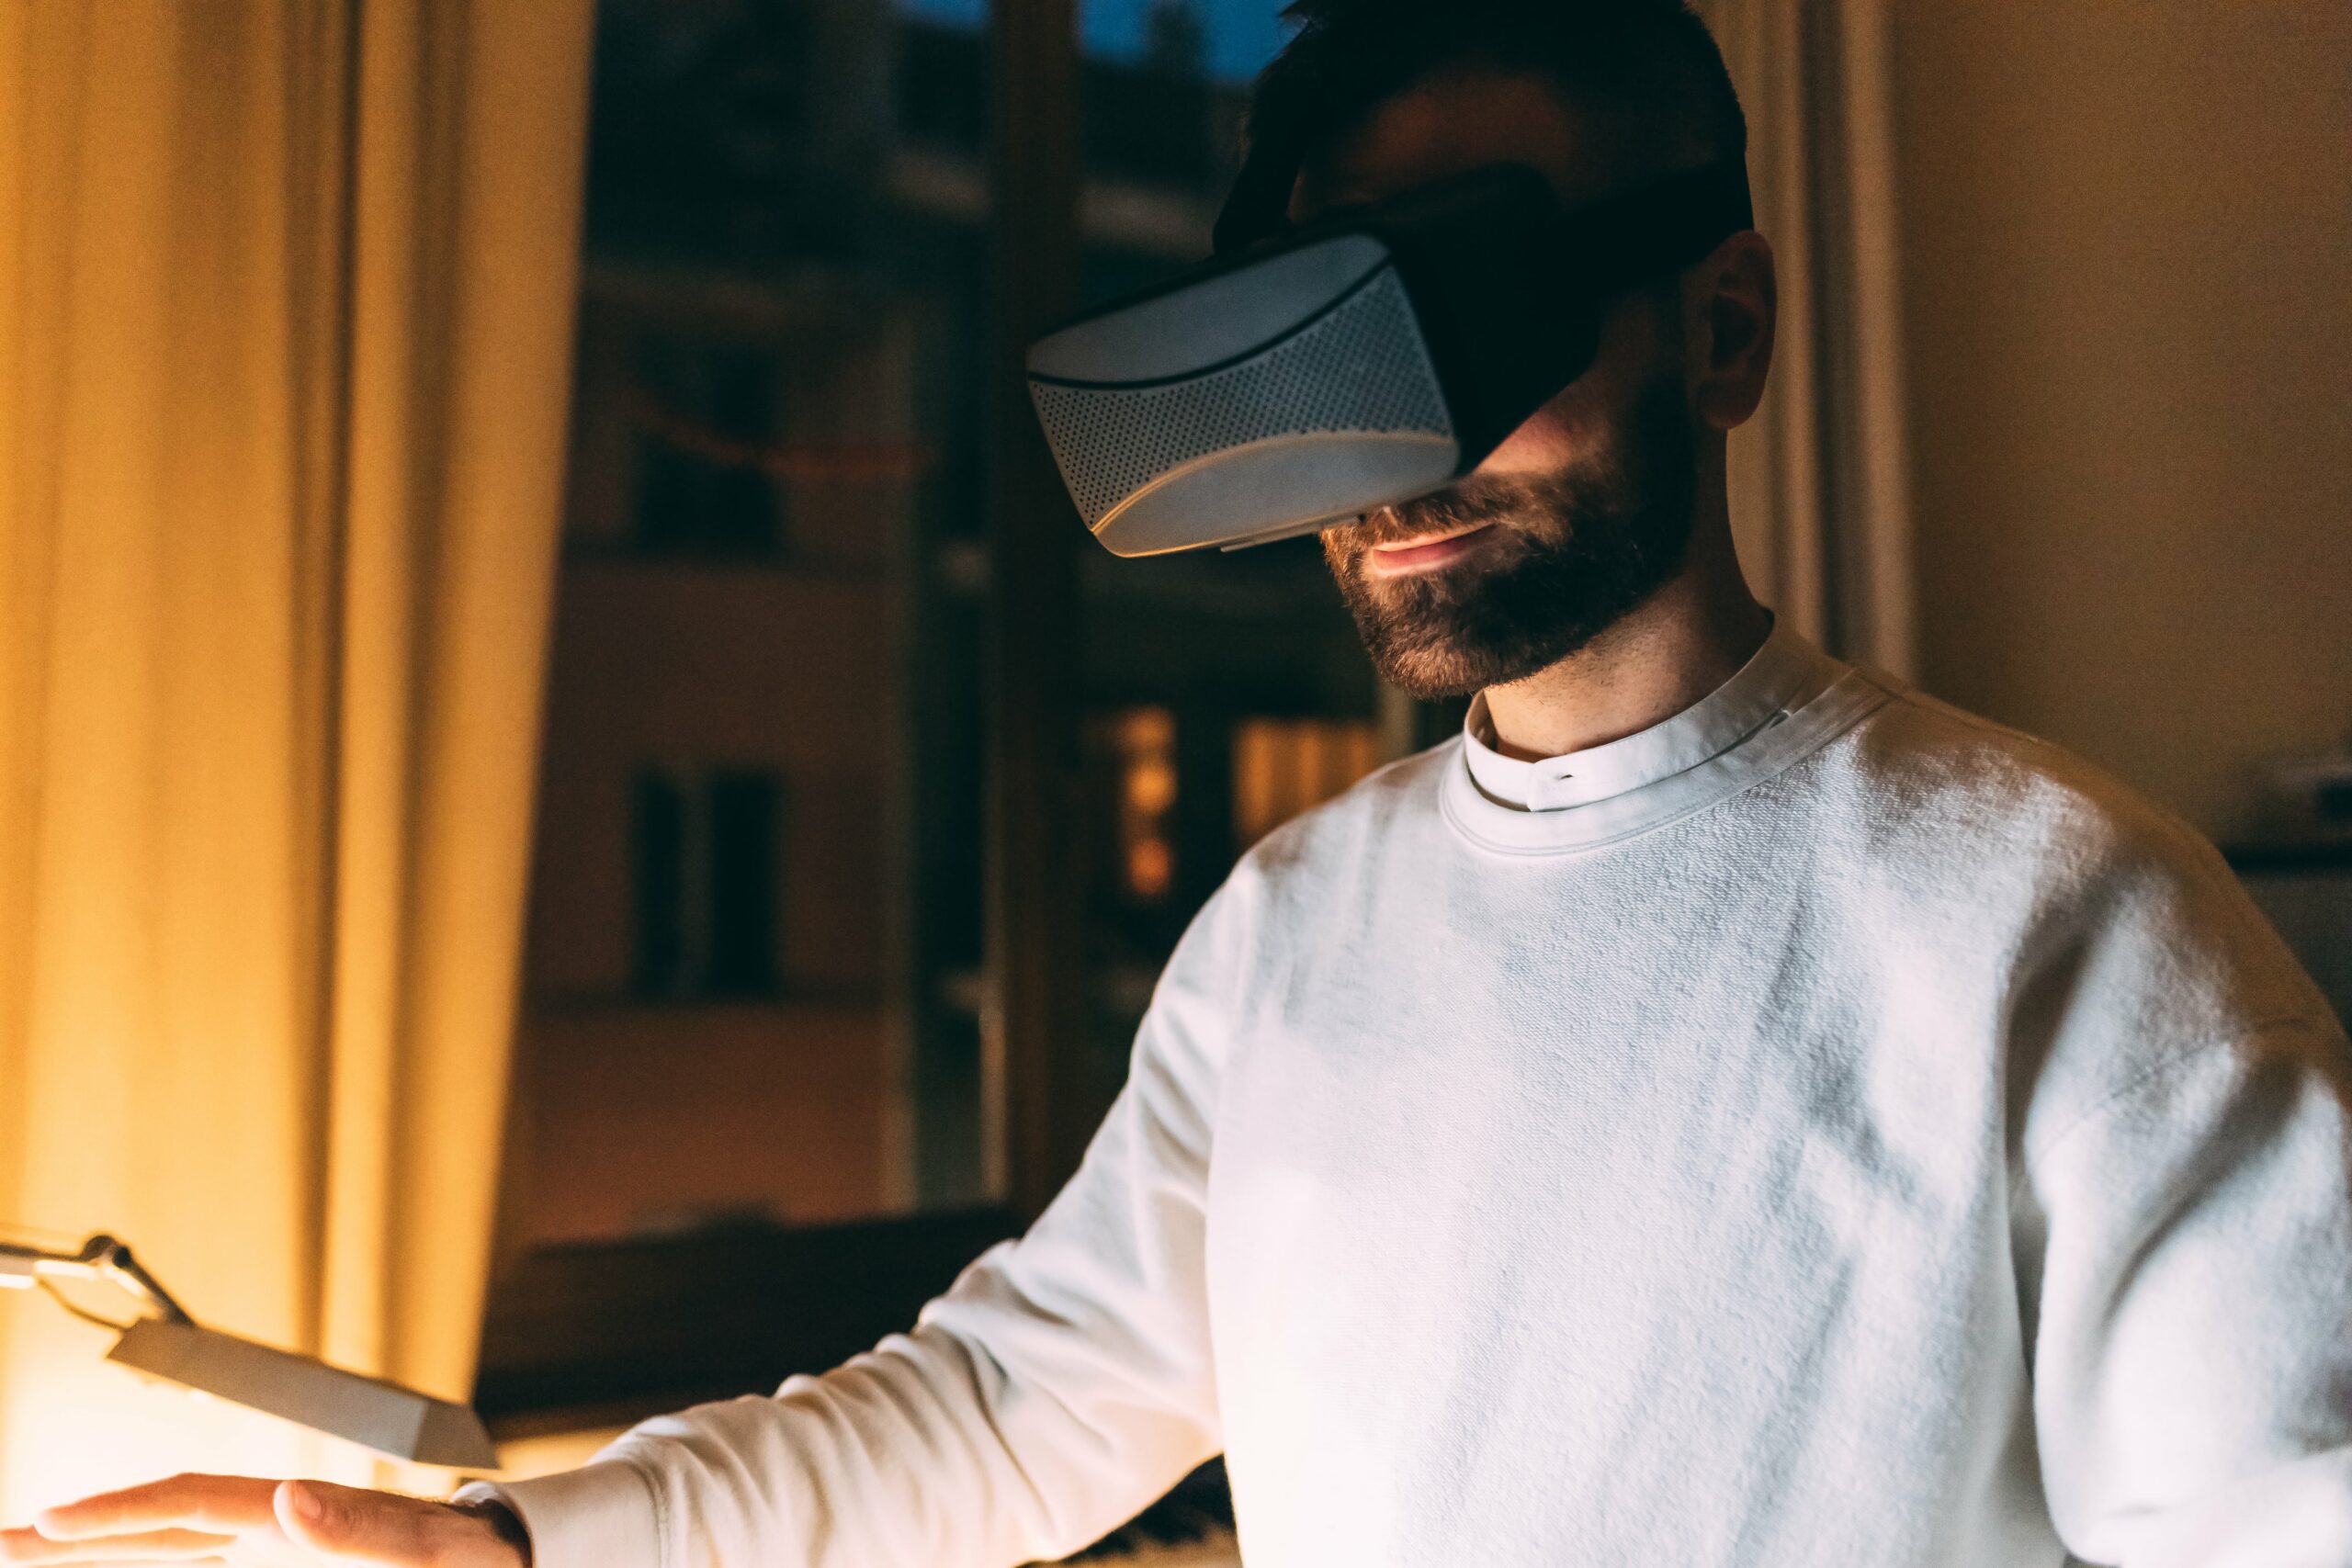 How your Business can Benefit from the Metaverse